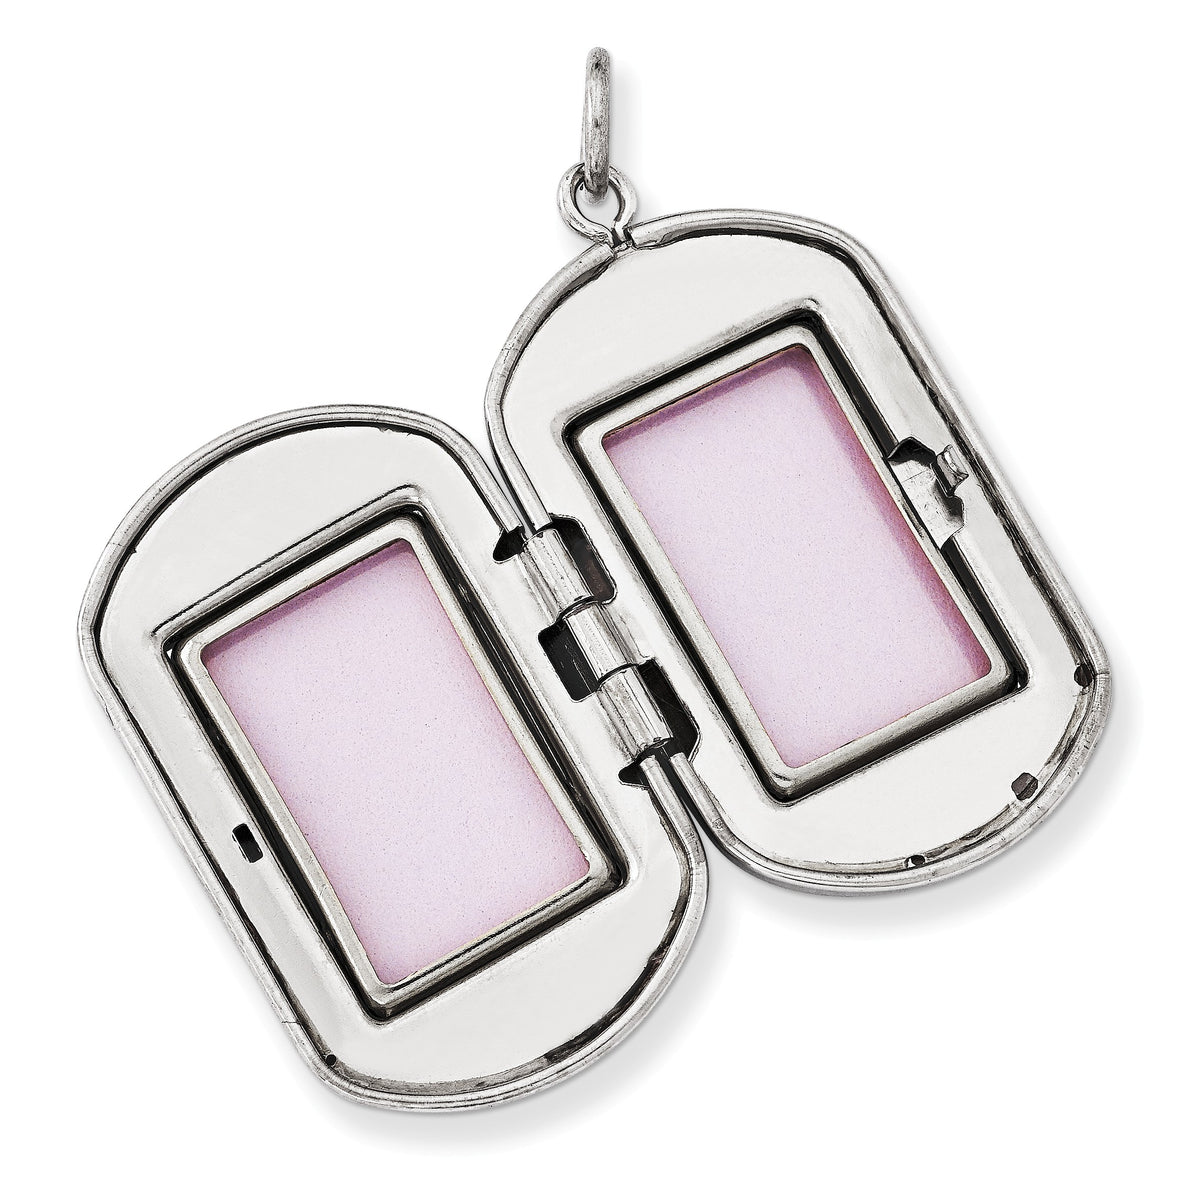 Alternate view of the Sterling Silver 30mm Polished Rectangular Locket by The Black Bow Jewelry Co.